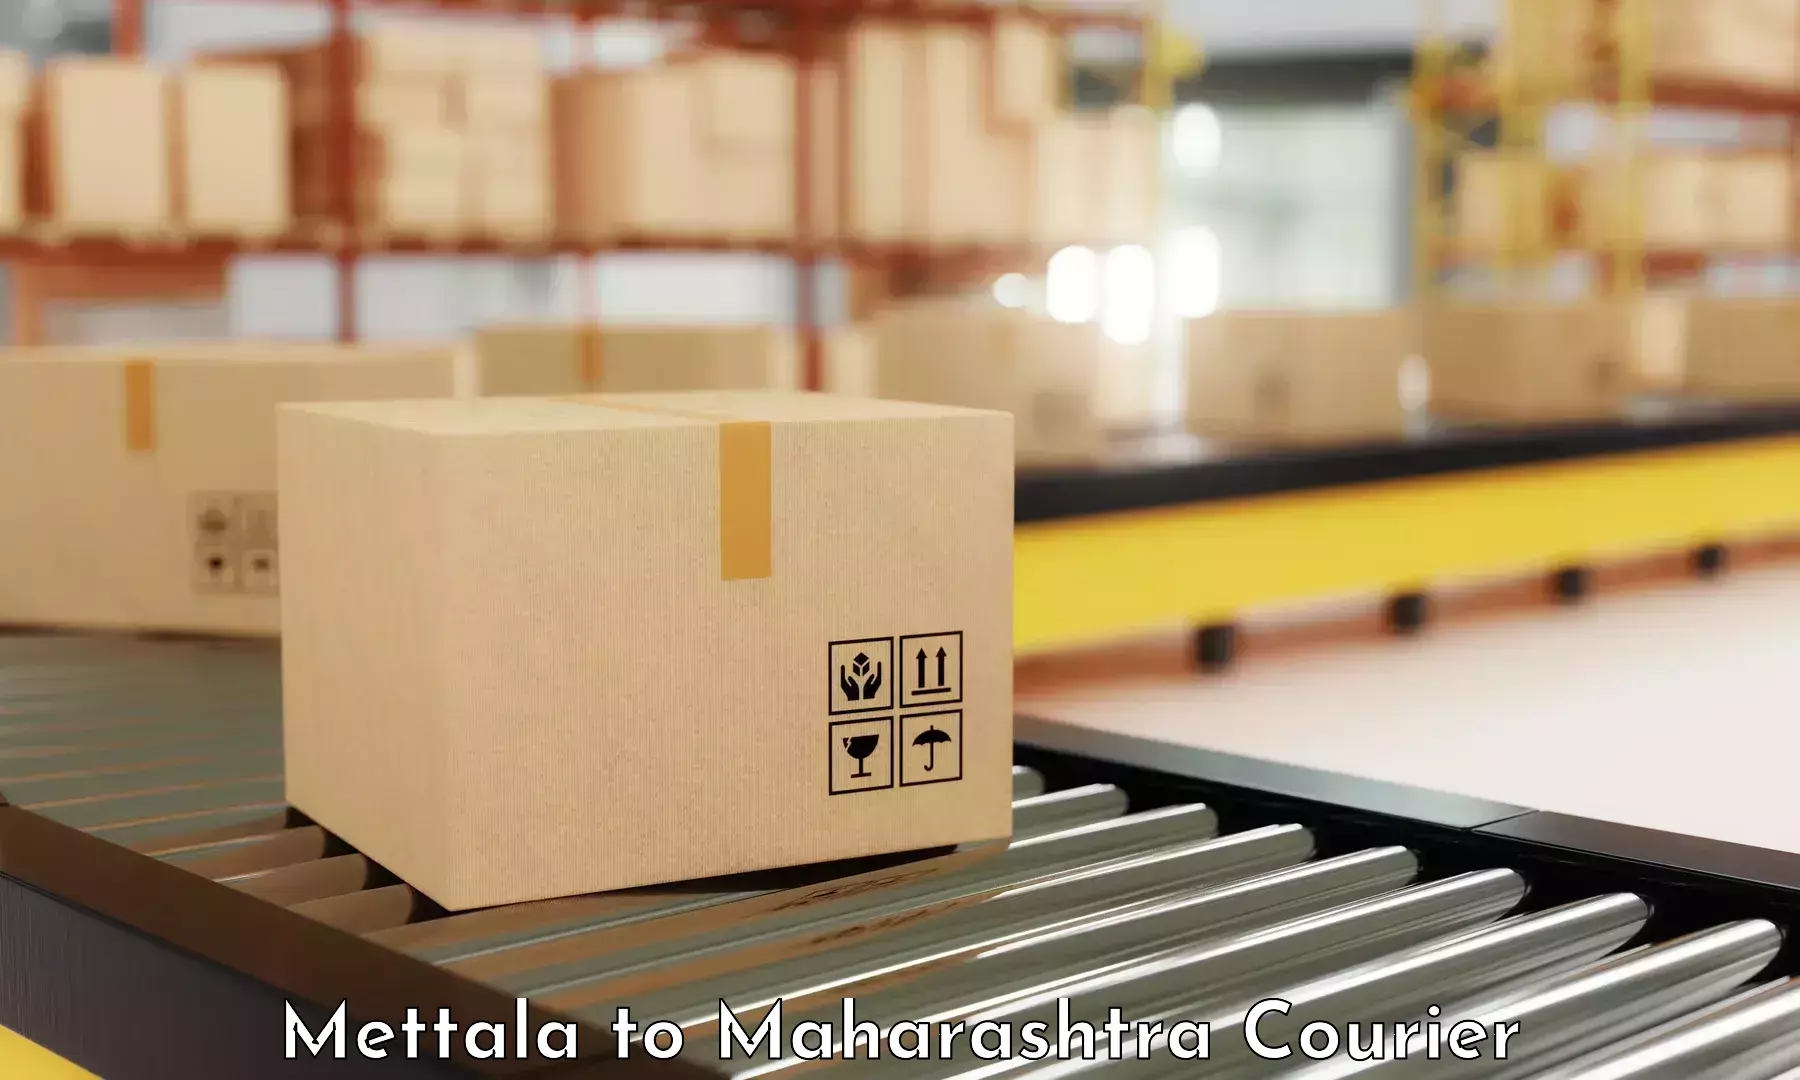 Personalized courier experiences in Mettala to Andheri